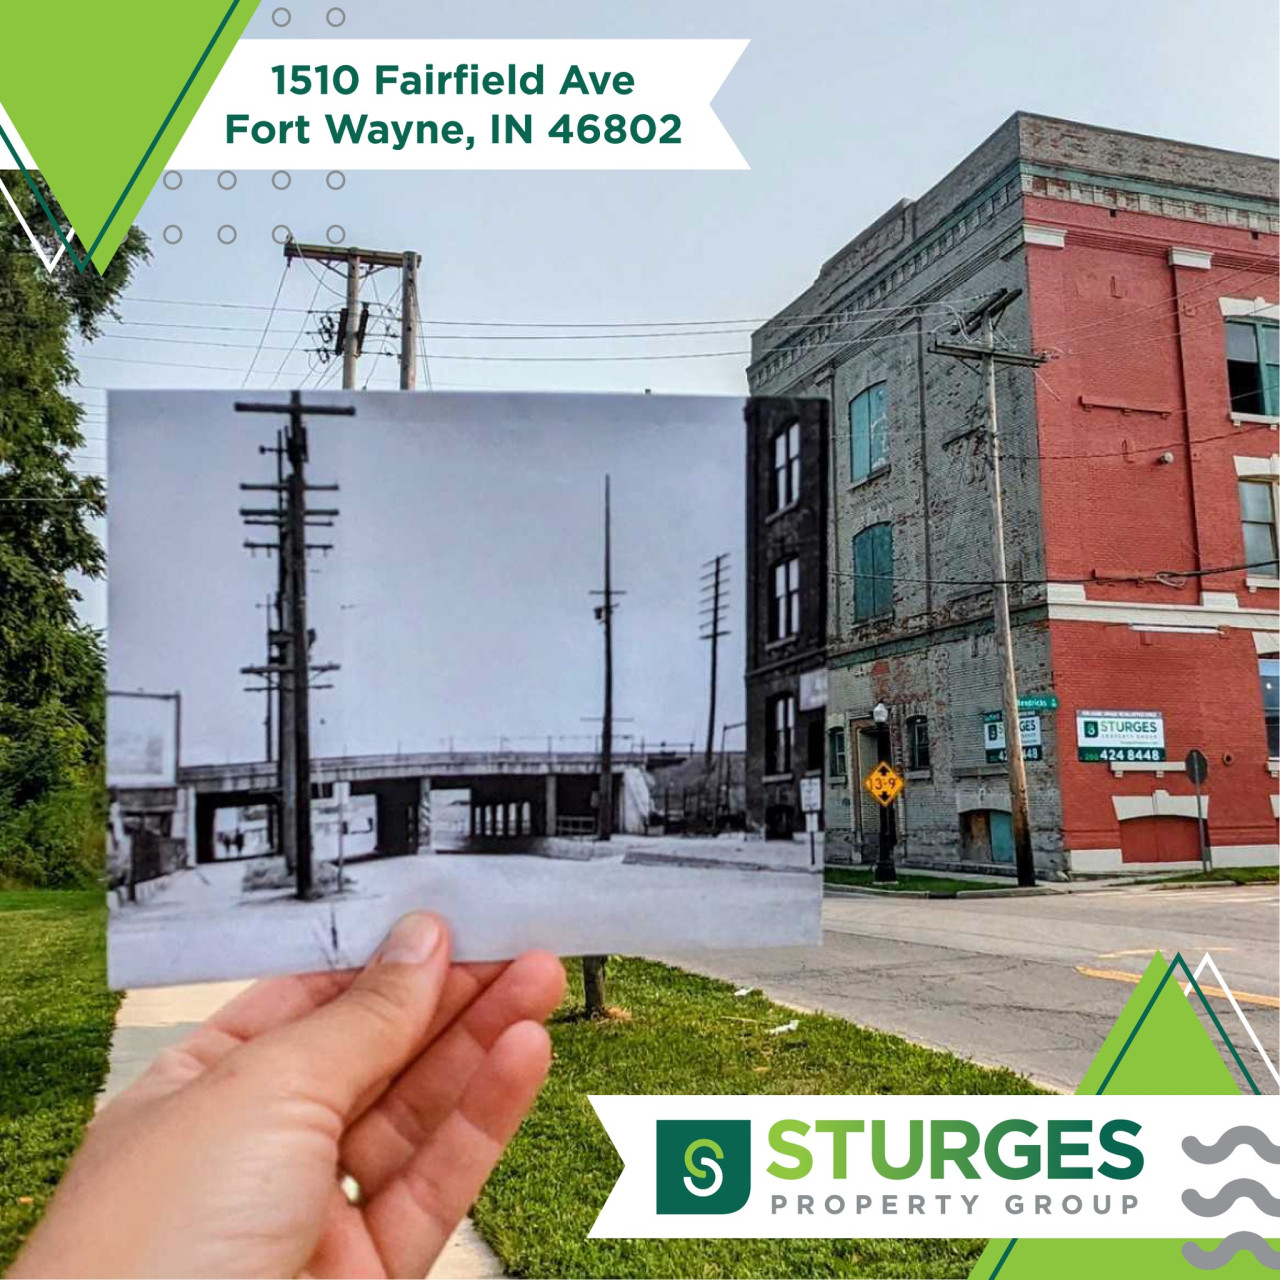 Sturges Property Group - 1510 Fairfield Ave, Fort Wayne, IN 46802